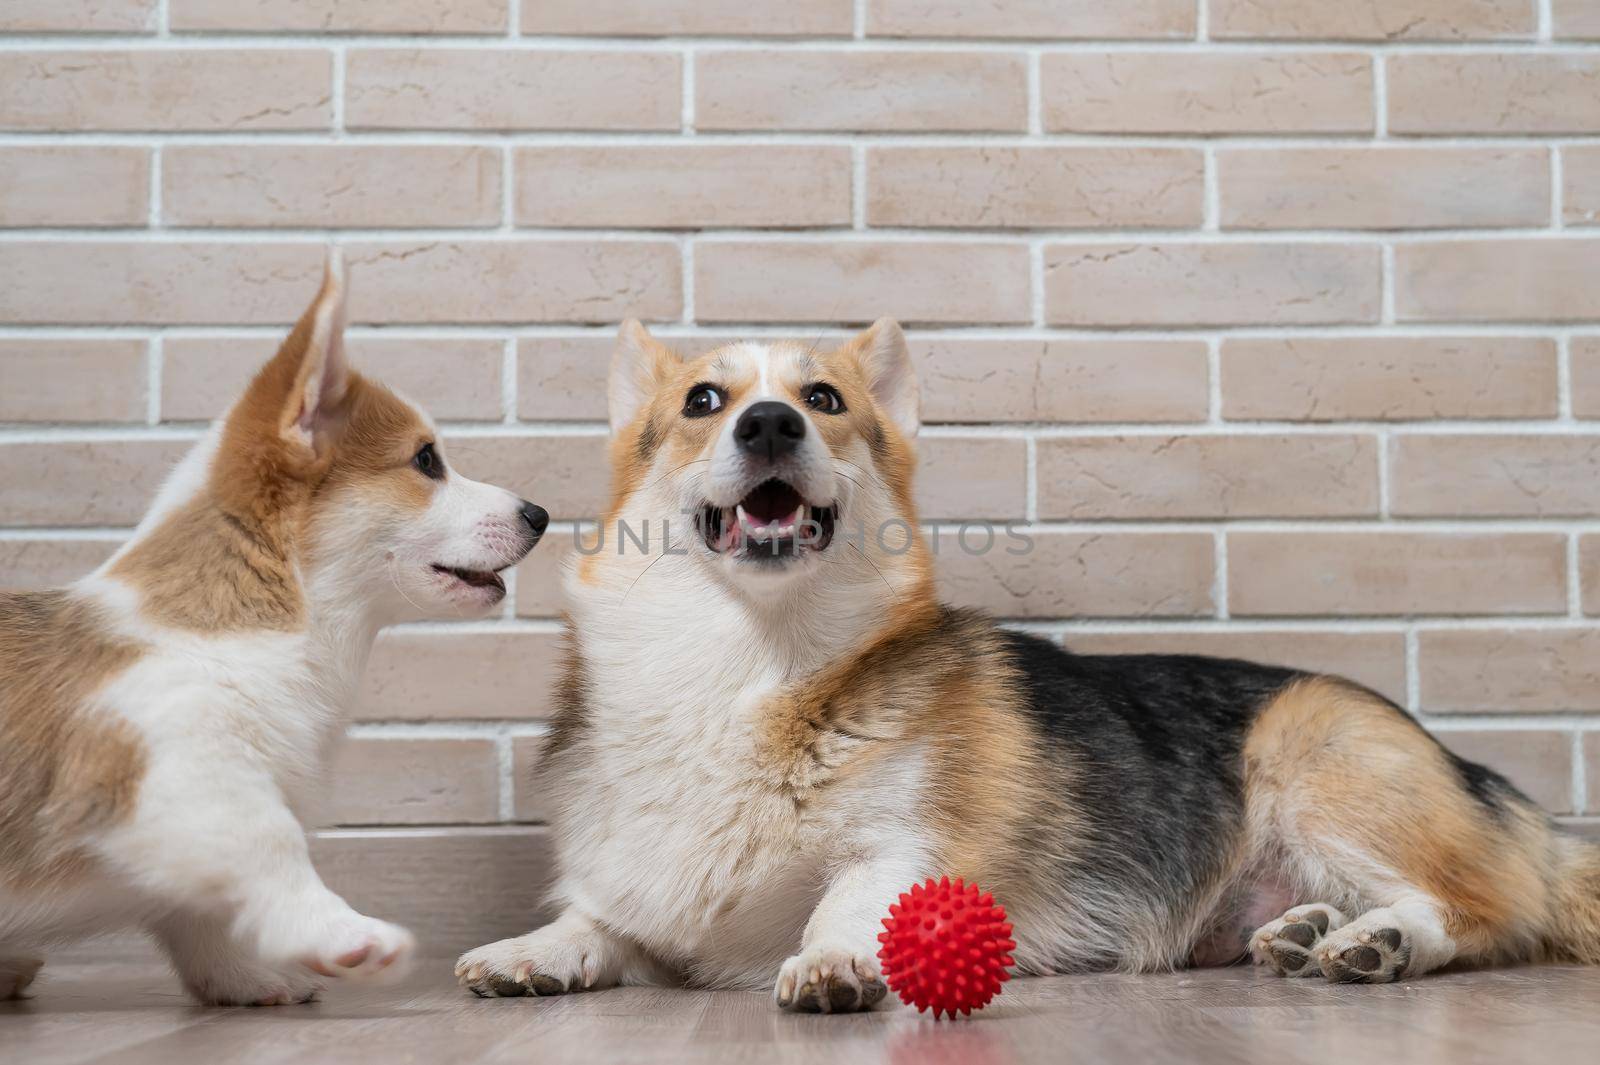 Pembroke Corgi puppy and his mother playing with a red ball. by mrwed54